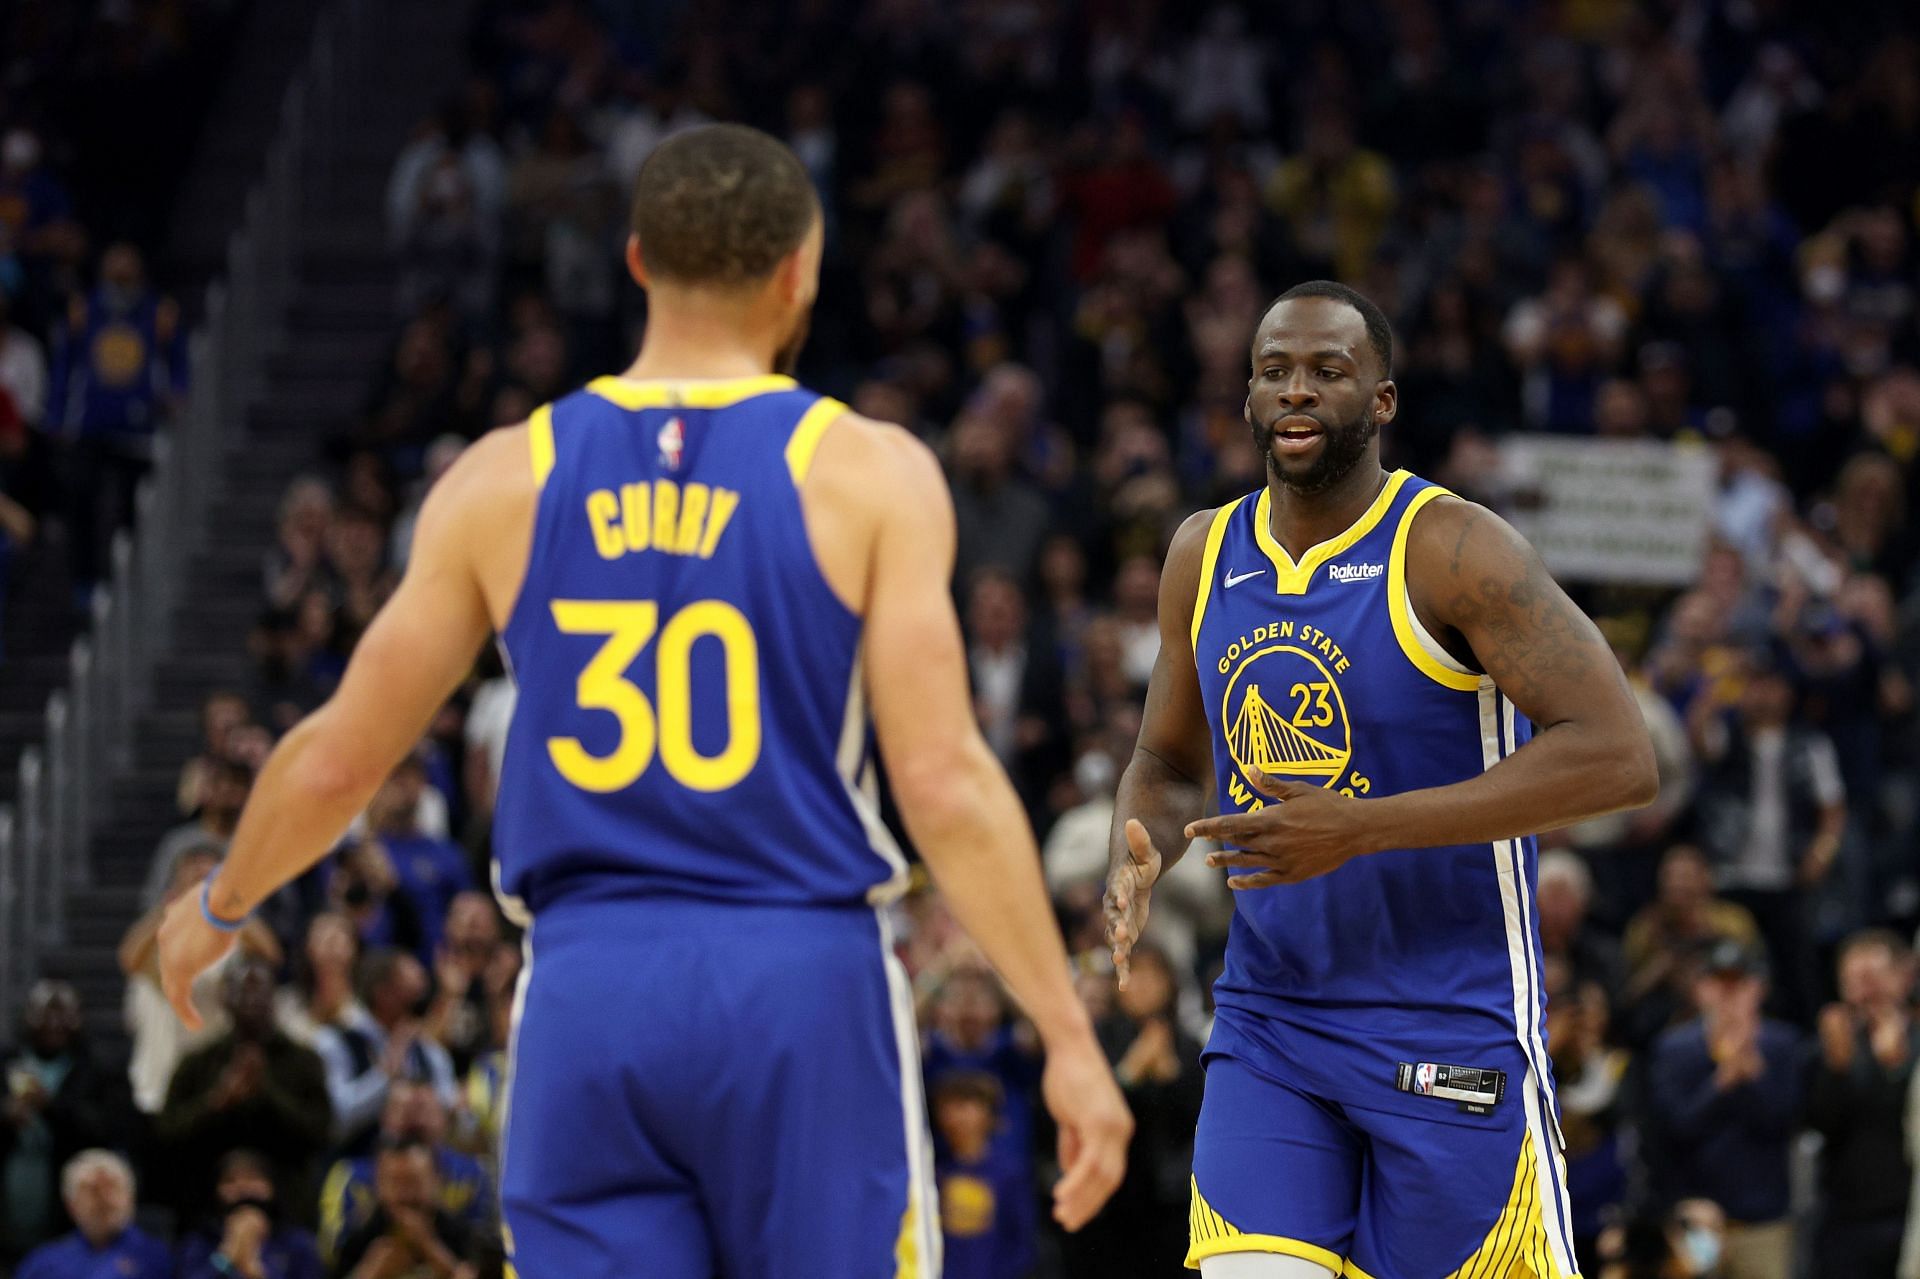 Draymond Green and Steph Curry will go from teammates to rivals in the NCAA tournament.